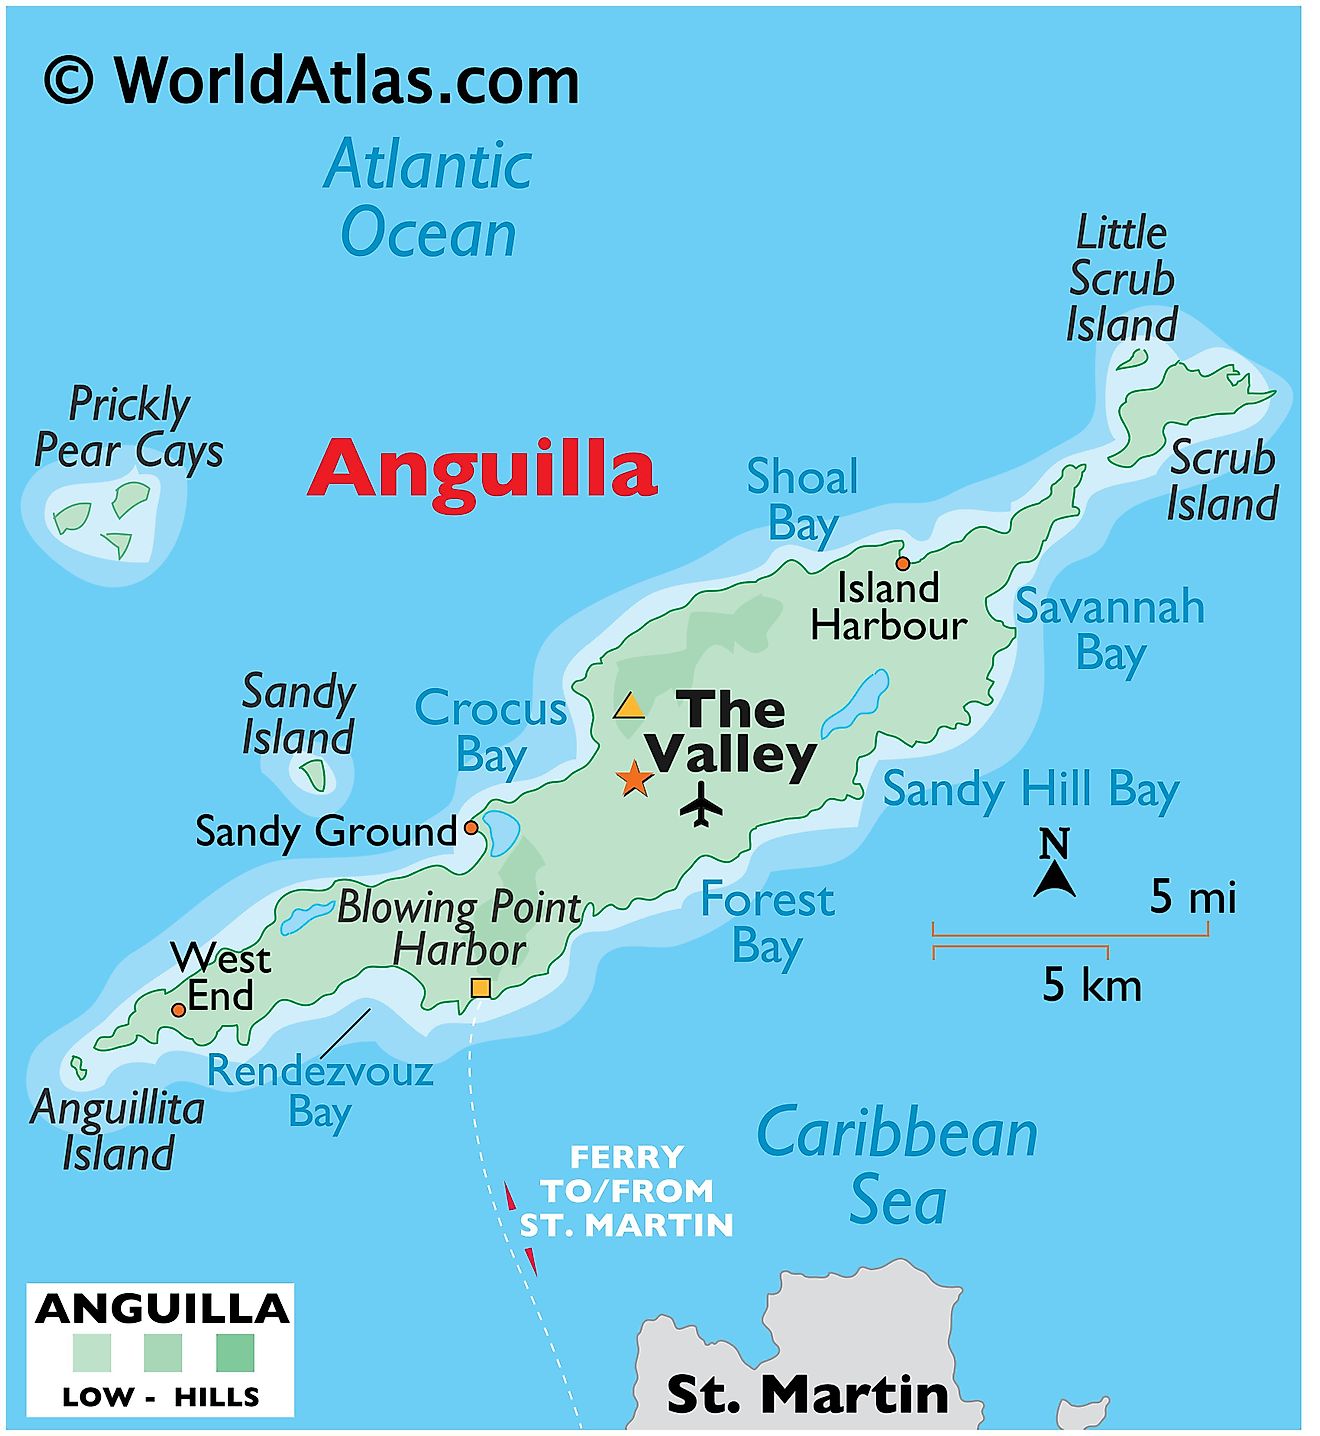 Physical Map of Anguilla showing islands, relief, important harbours, the capital, surrounding water features, and more.